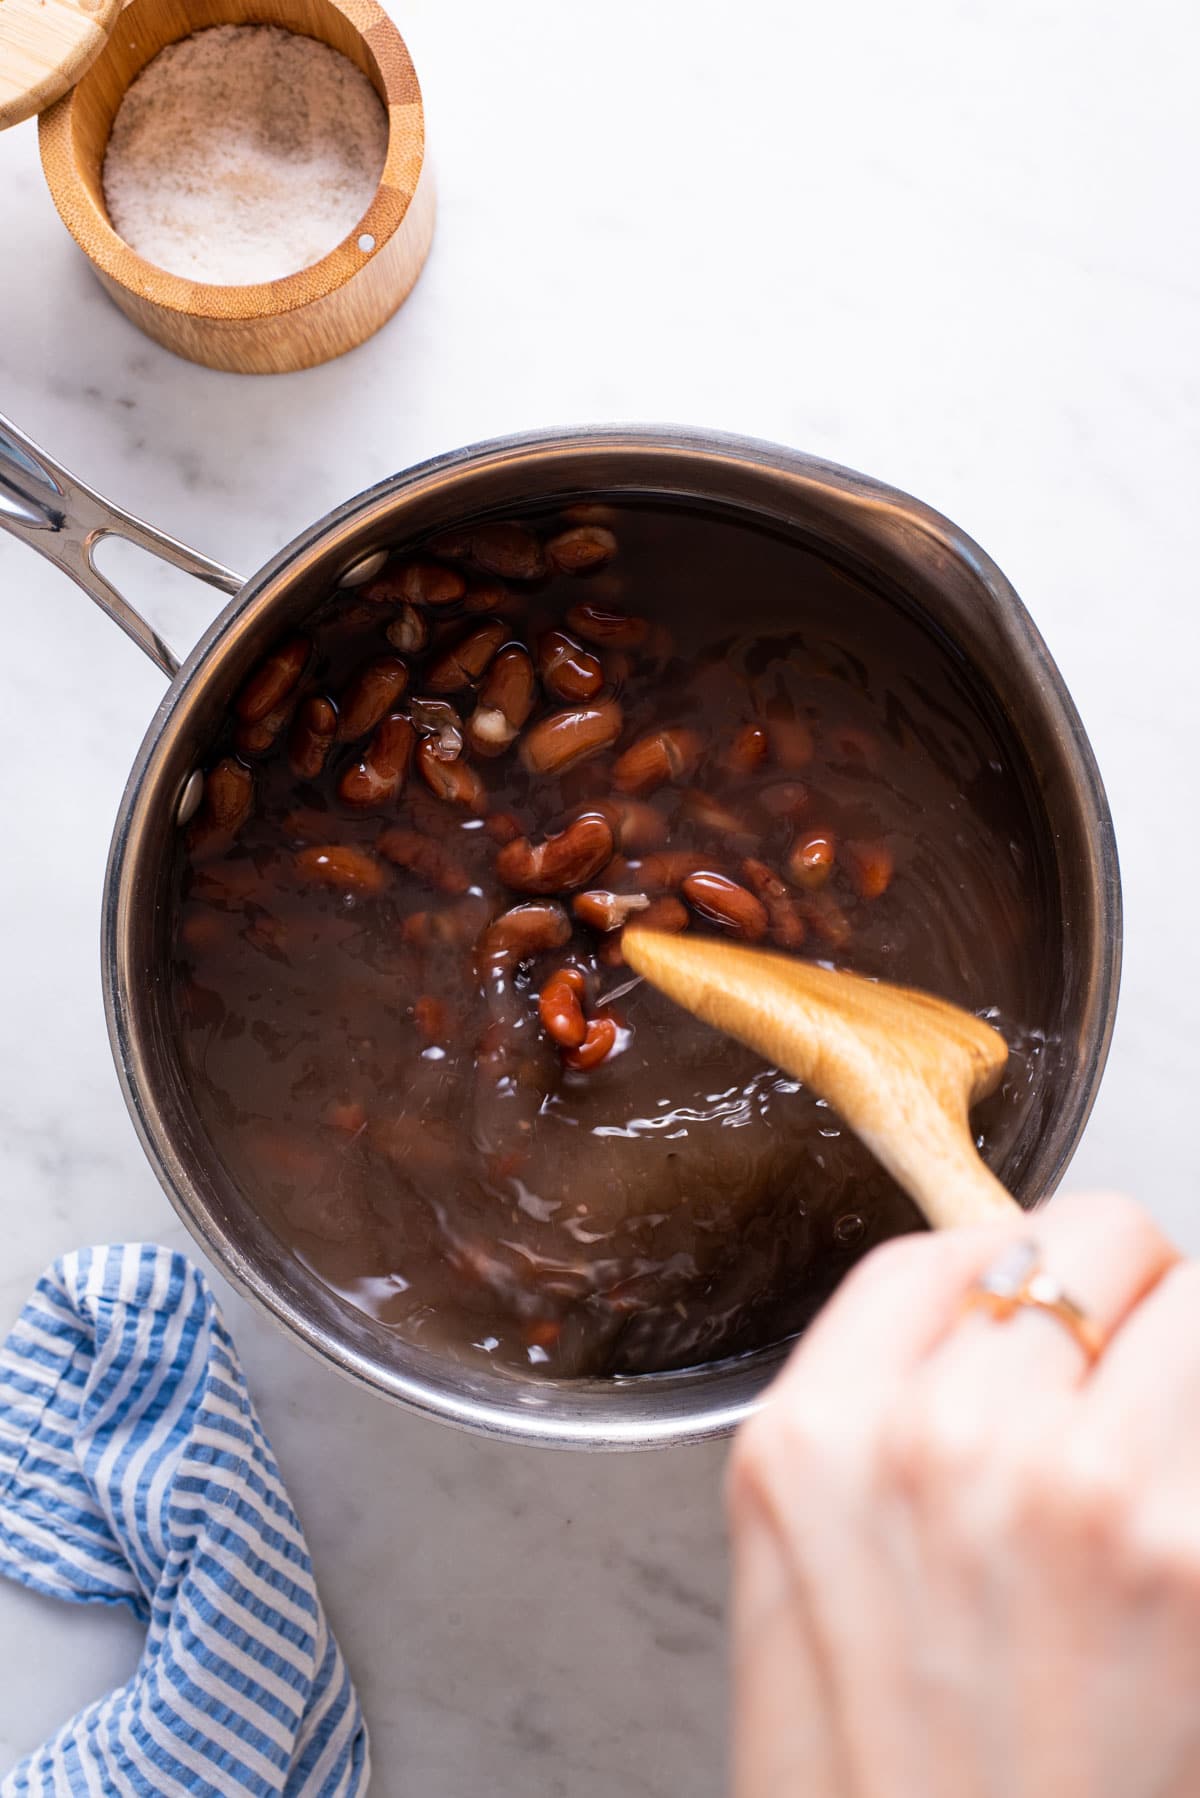 Stirring salt into a pot of cooked kidney beans.